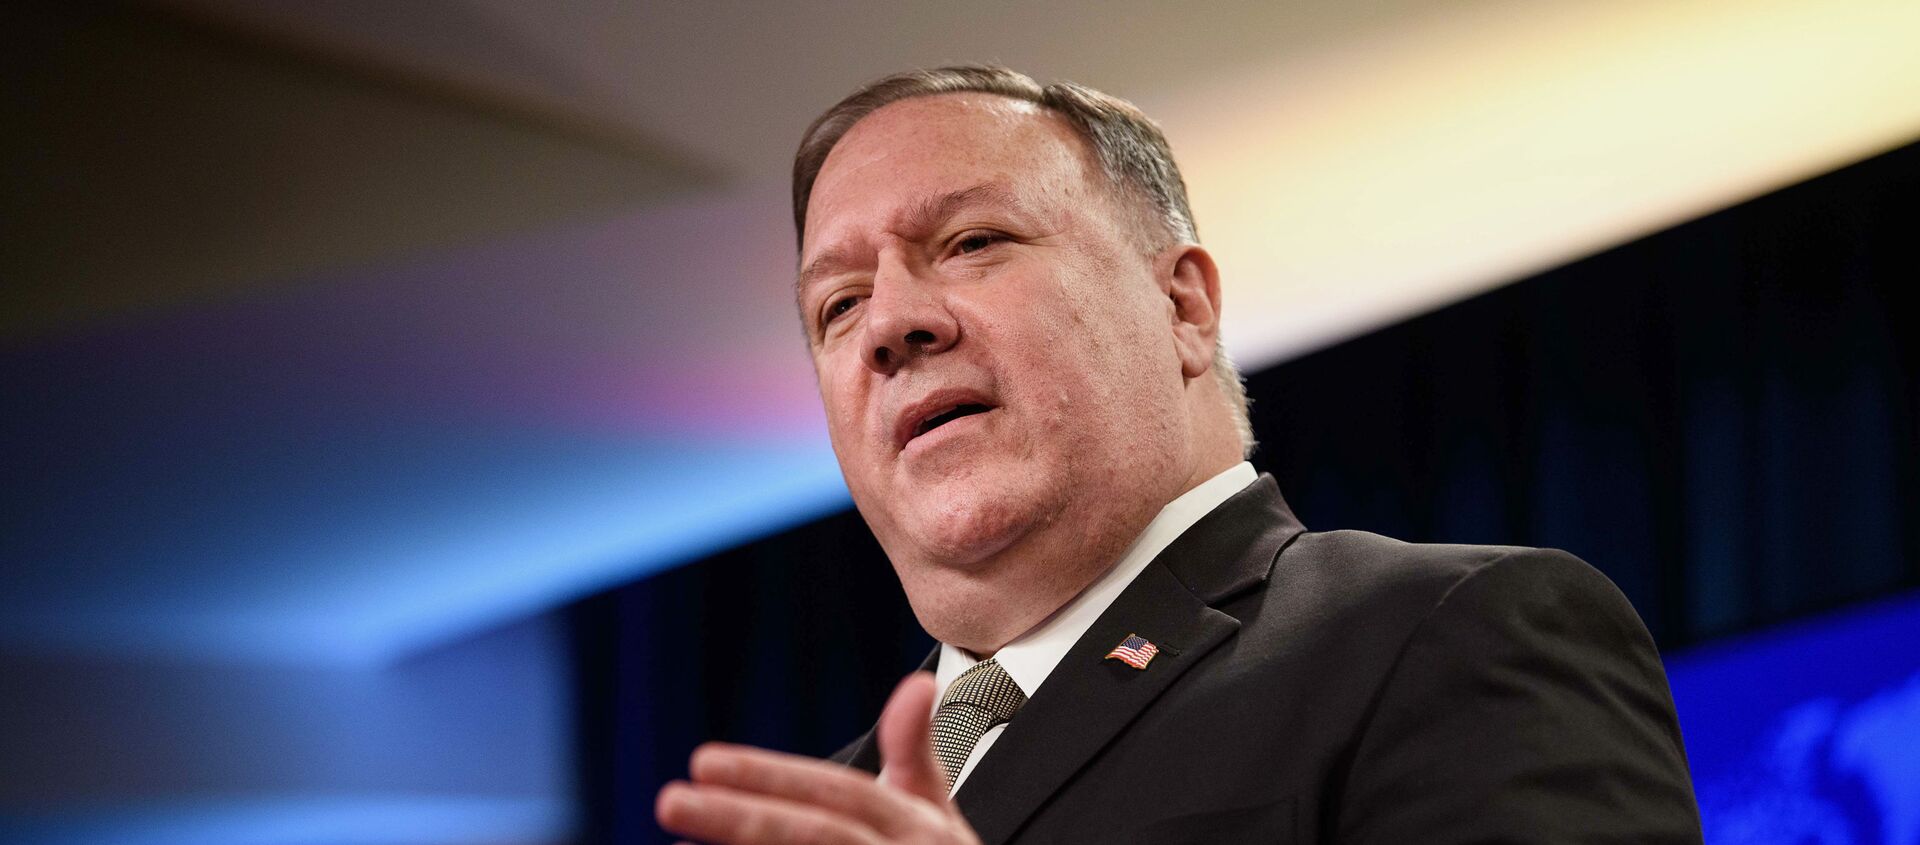 Secretary of State Mike Pompeo speaks during a news conference at the State Department in Washington, Wednesday, Sept. 2, 2020 - Sputnik International, 1920, 25.10.2020